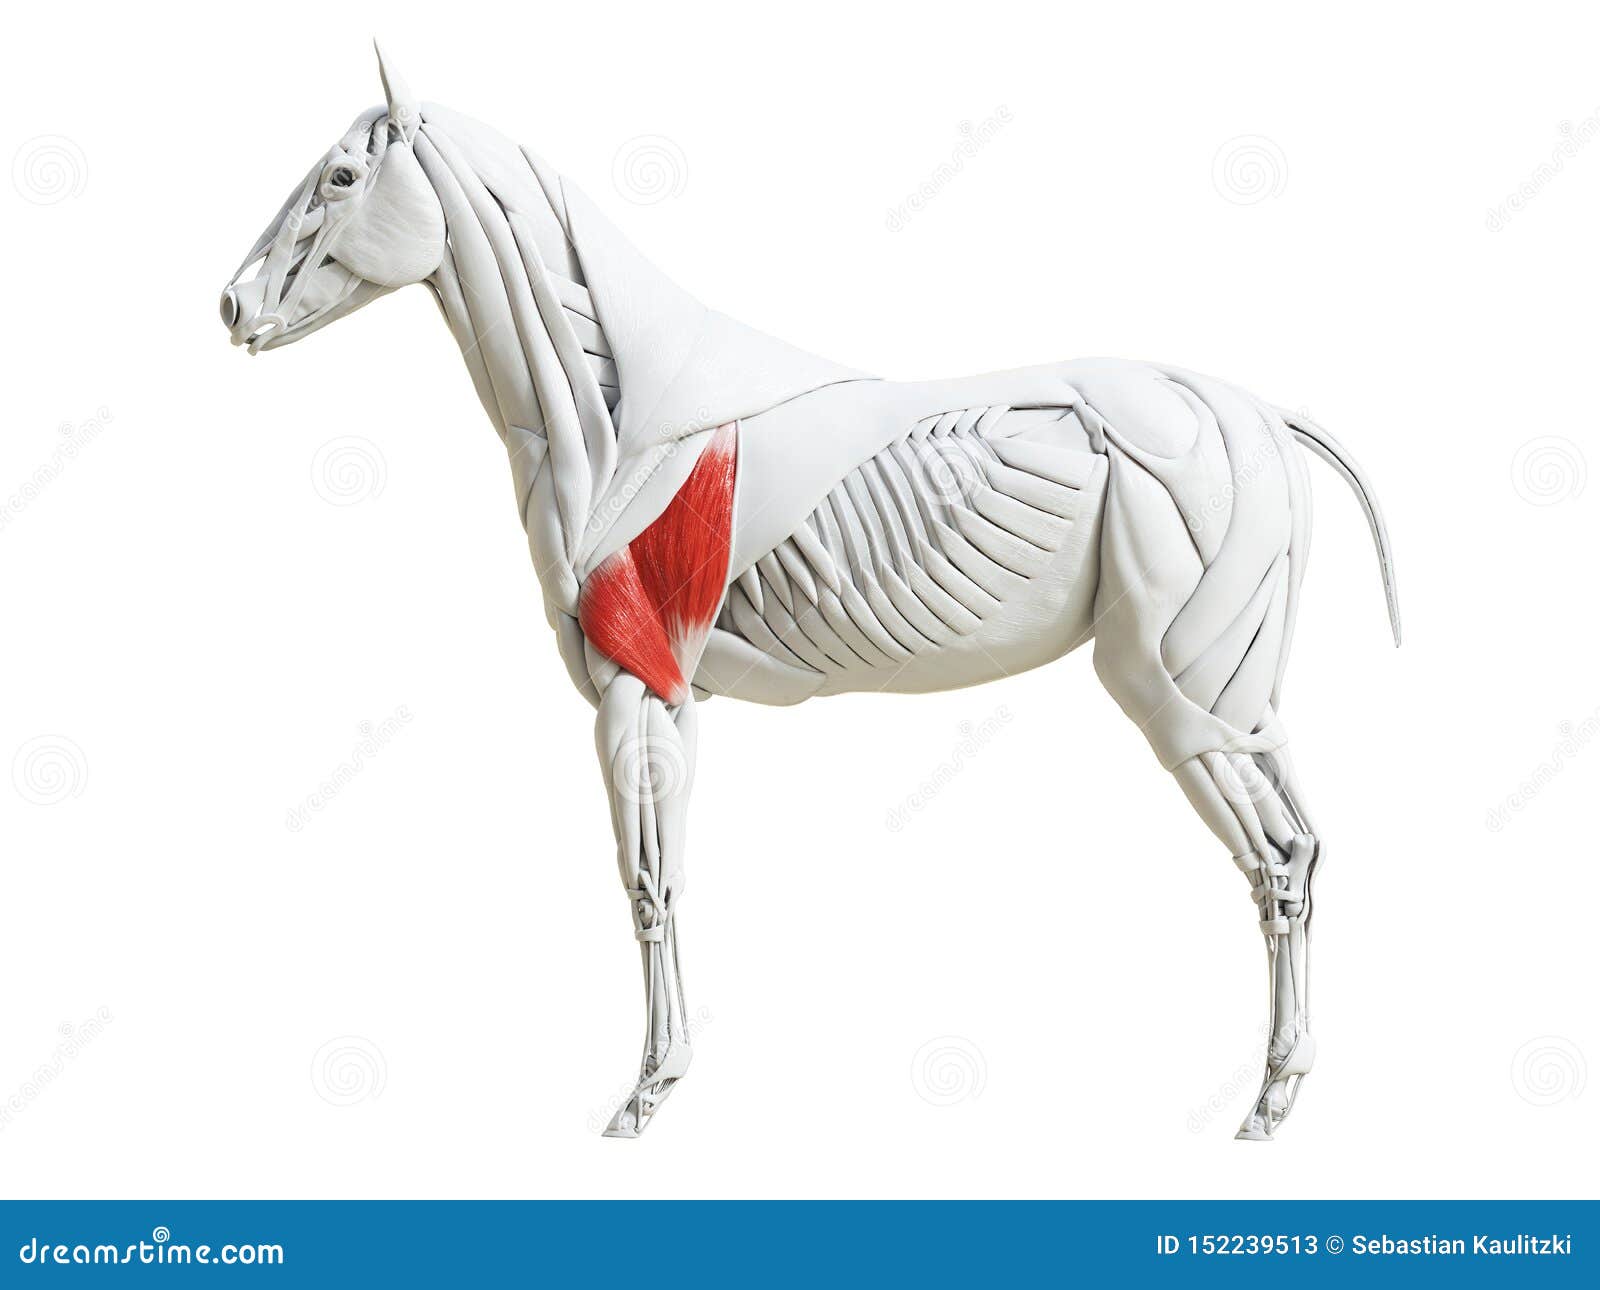 the equine muscle anatomy - triceps brachii